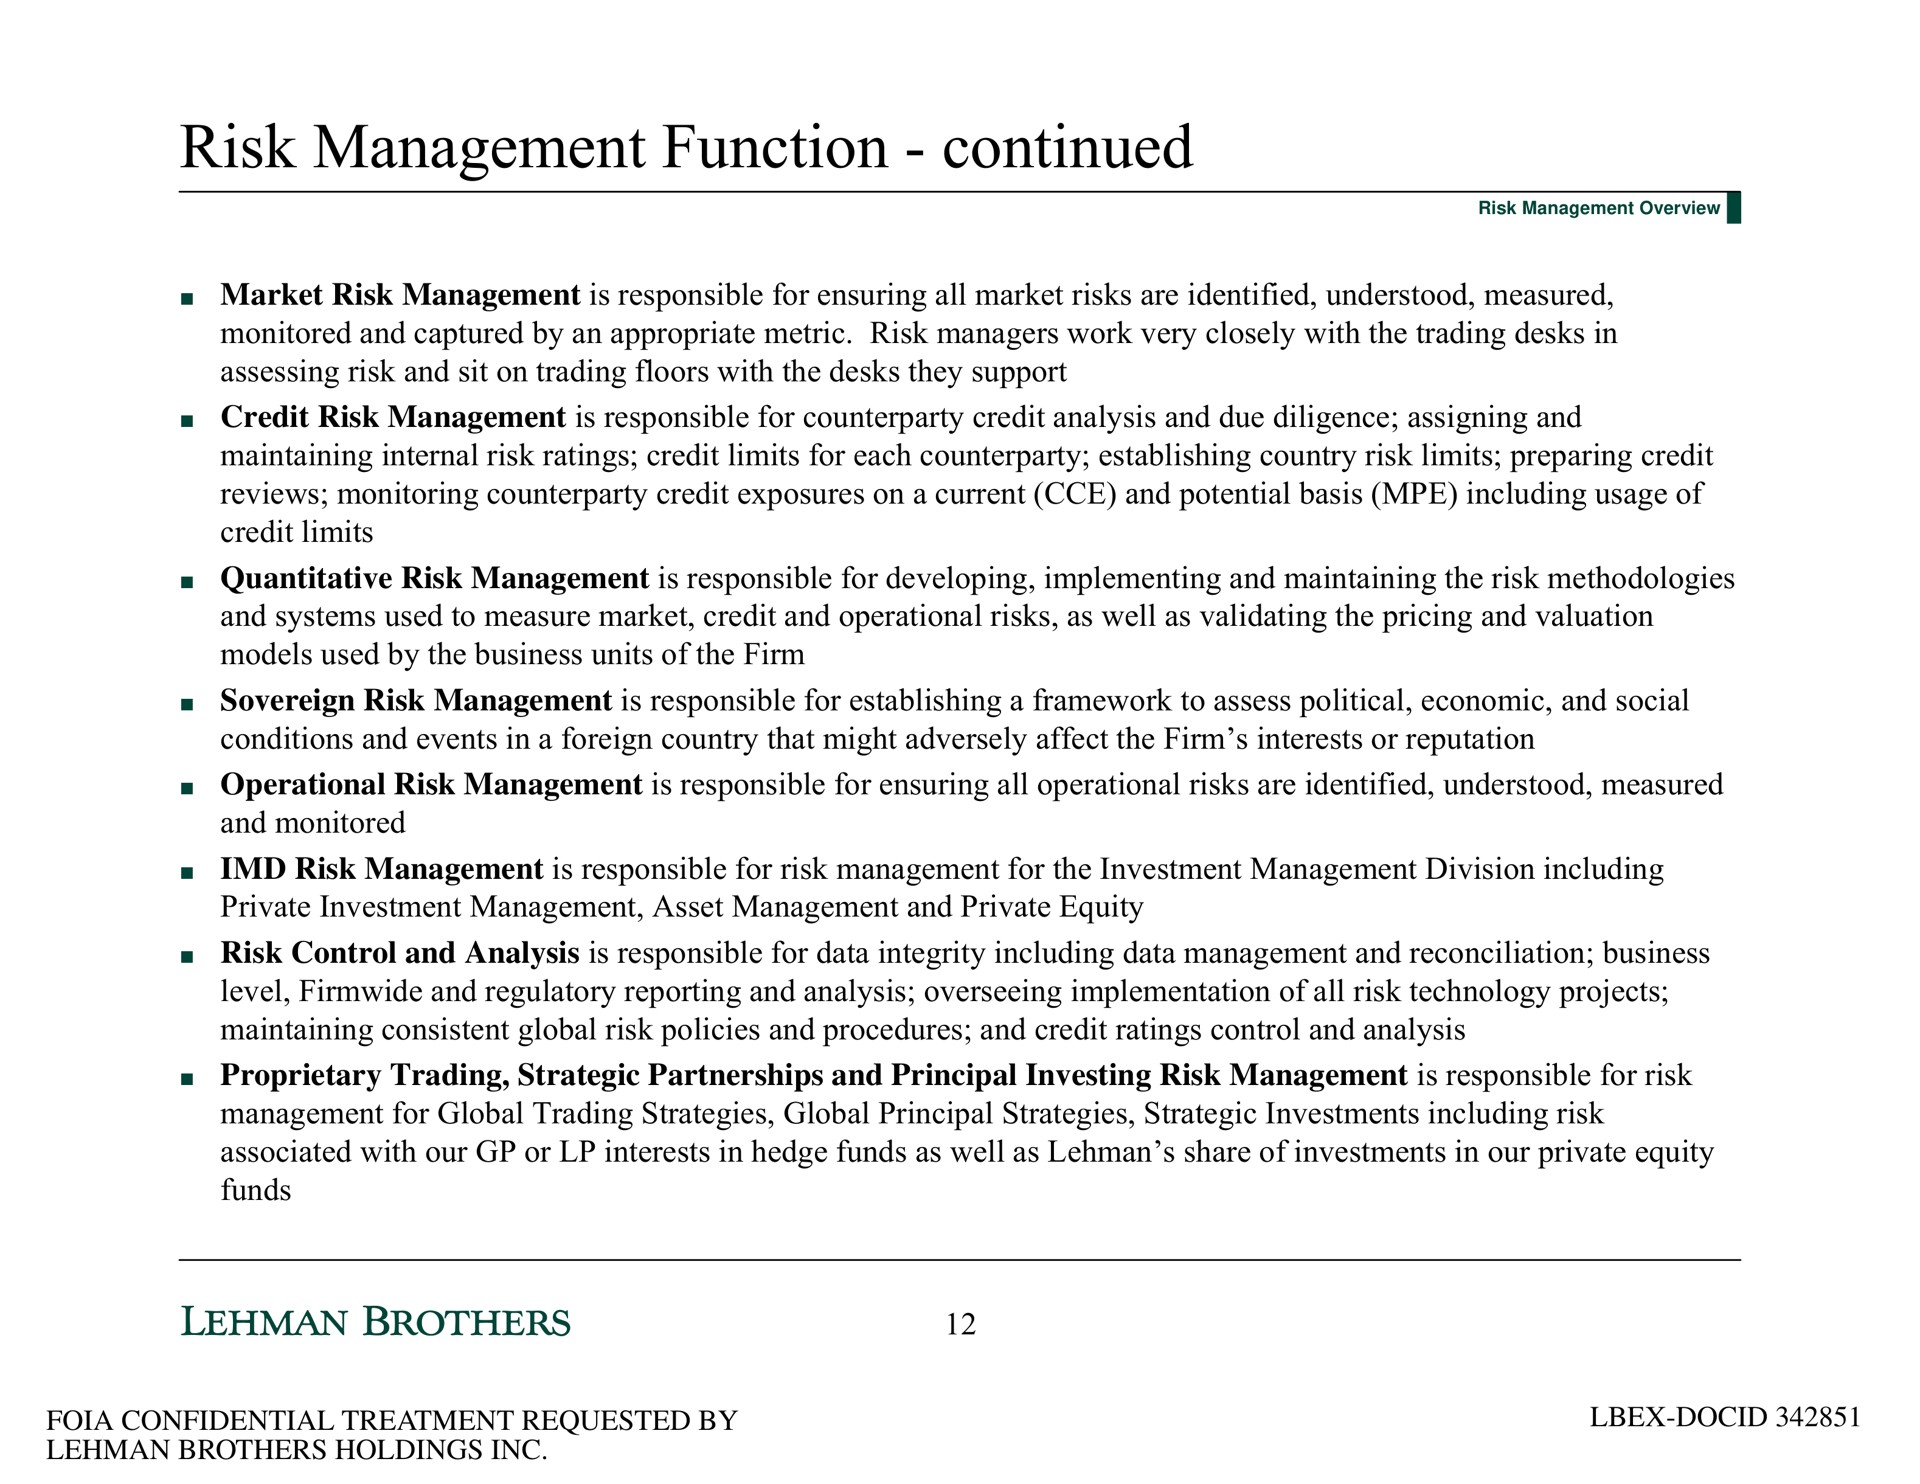 risk management function continued | Lehman Brothers